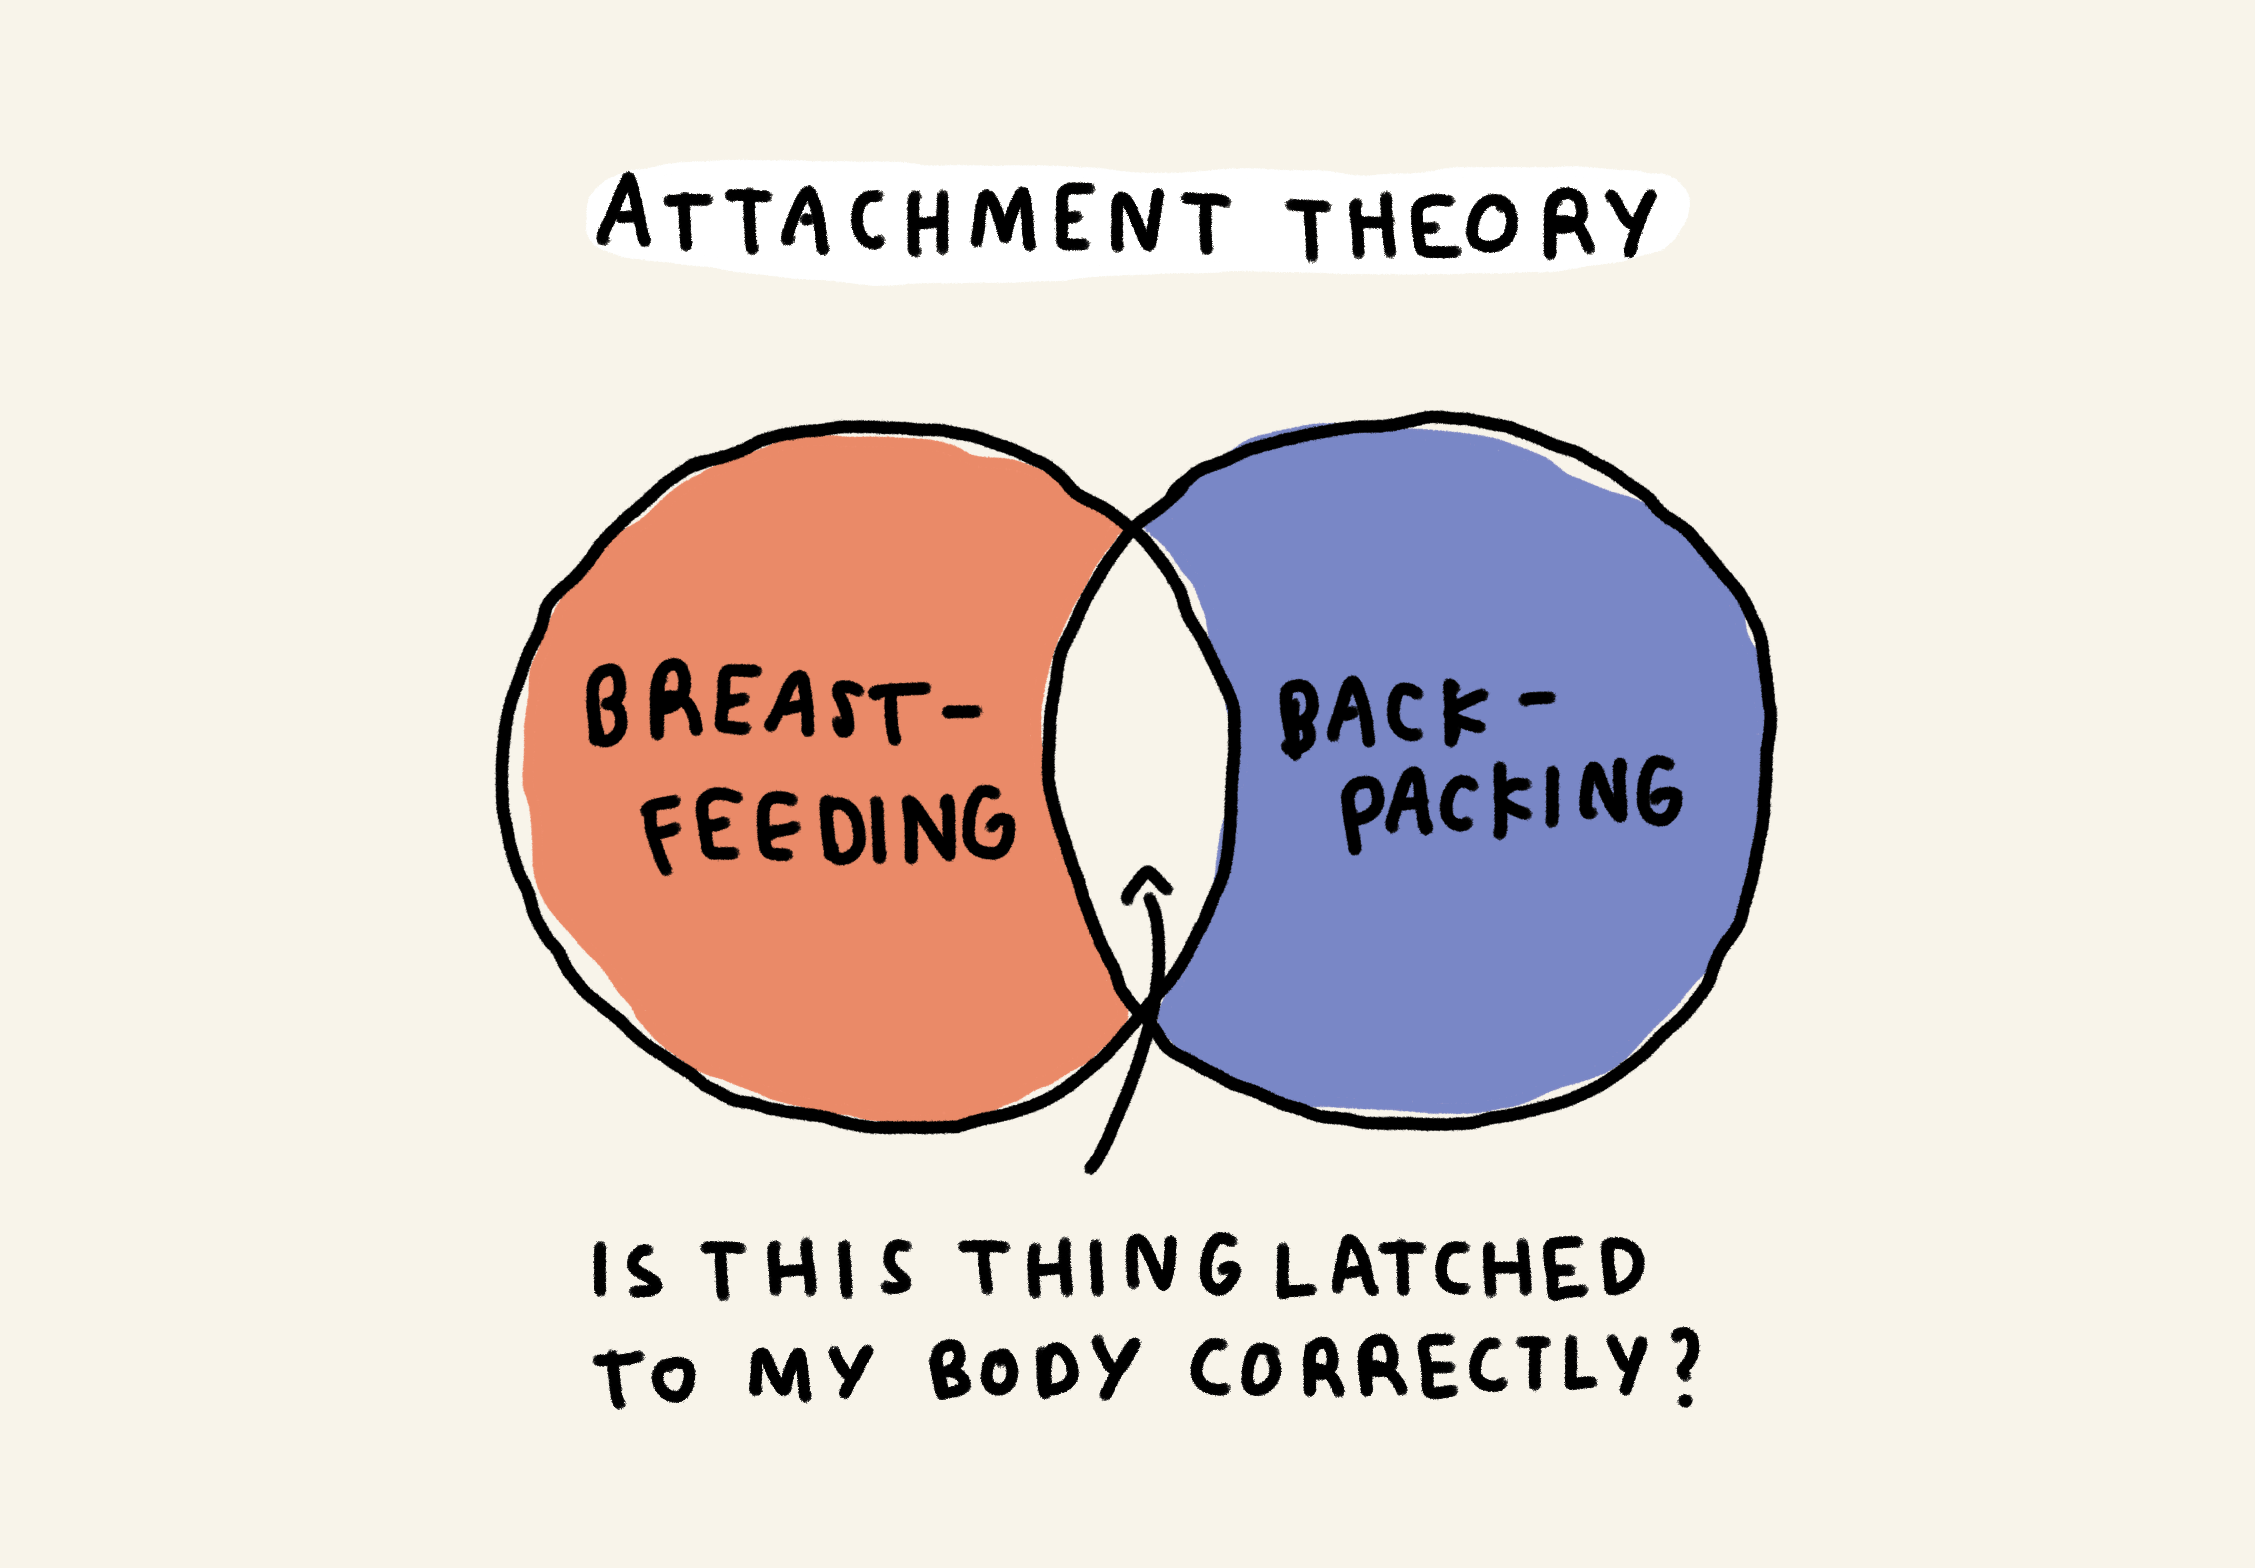 Attachment theory

Breastfeeding + backpacking = is this thing latched correctly to my body?